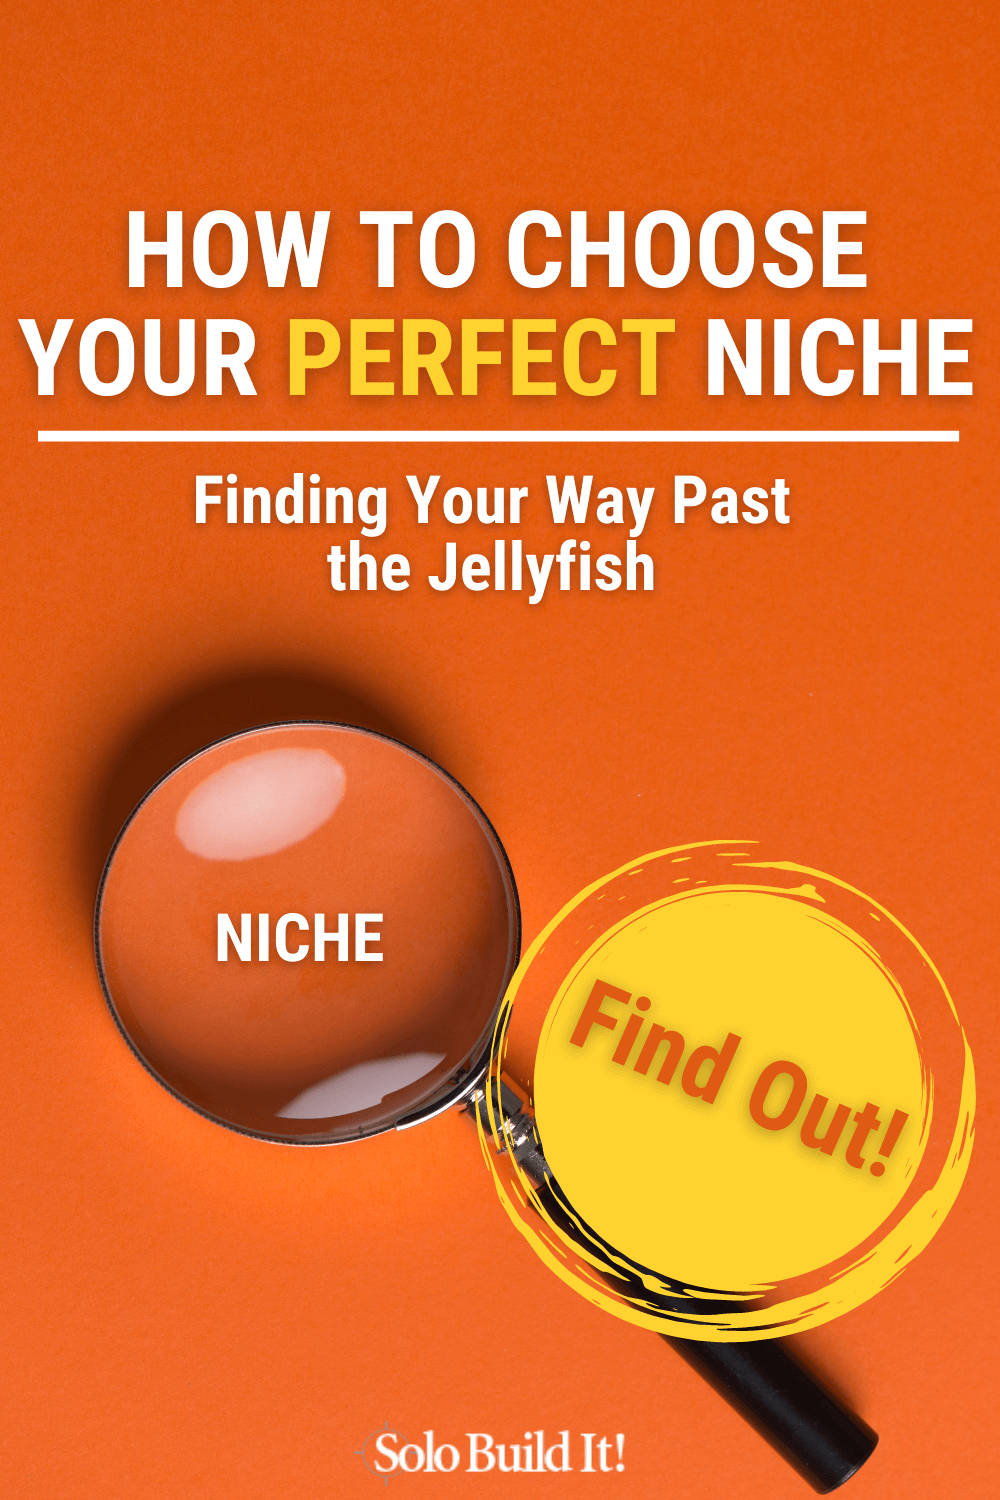 How to Choose Your Perfect Niche in 3 Simple Steps